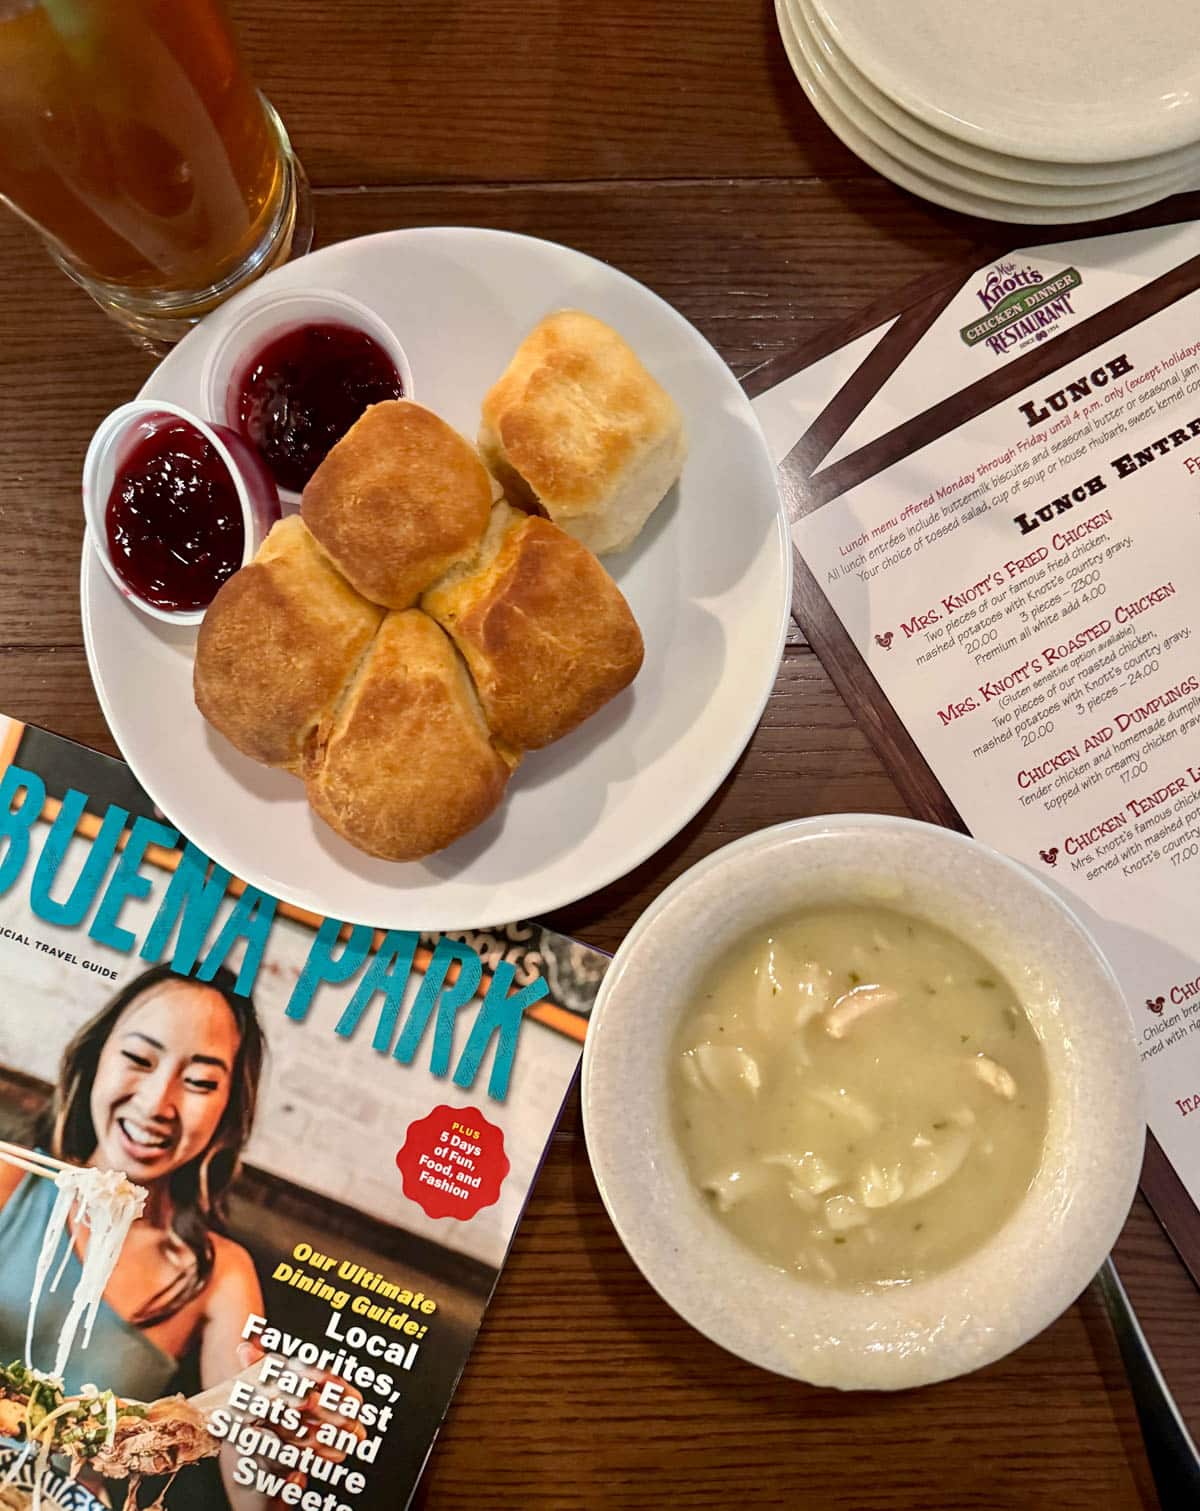 Chicken soup and biscuits with menu and Buena Park magazine on wood table.